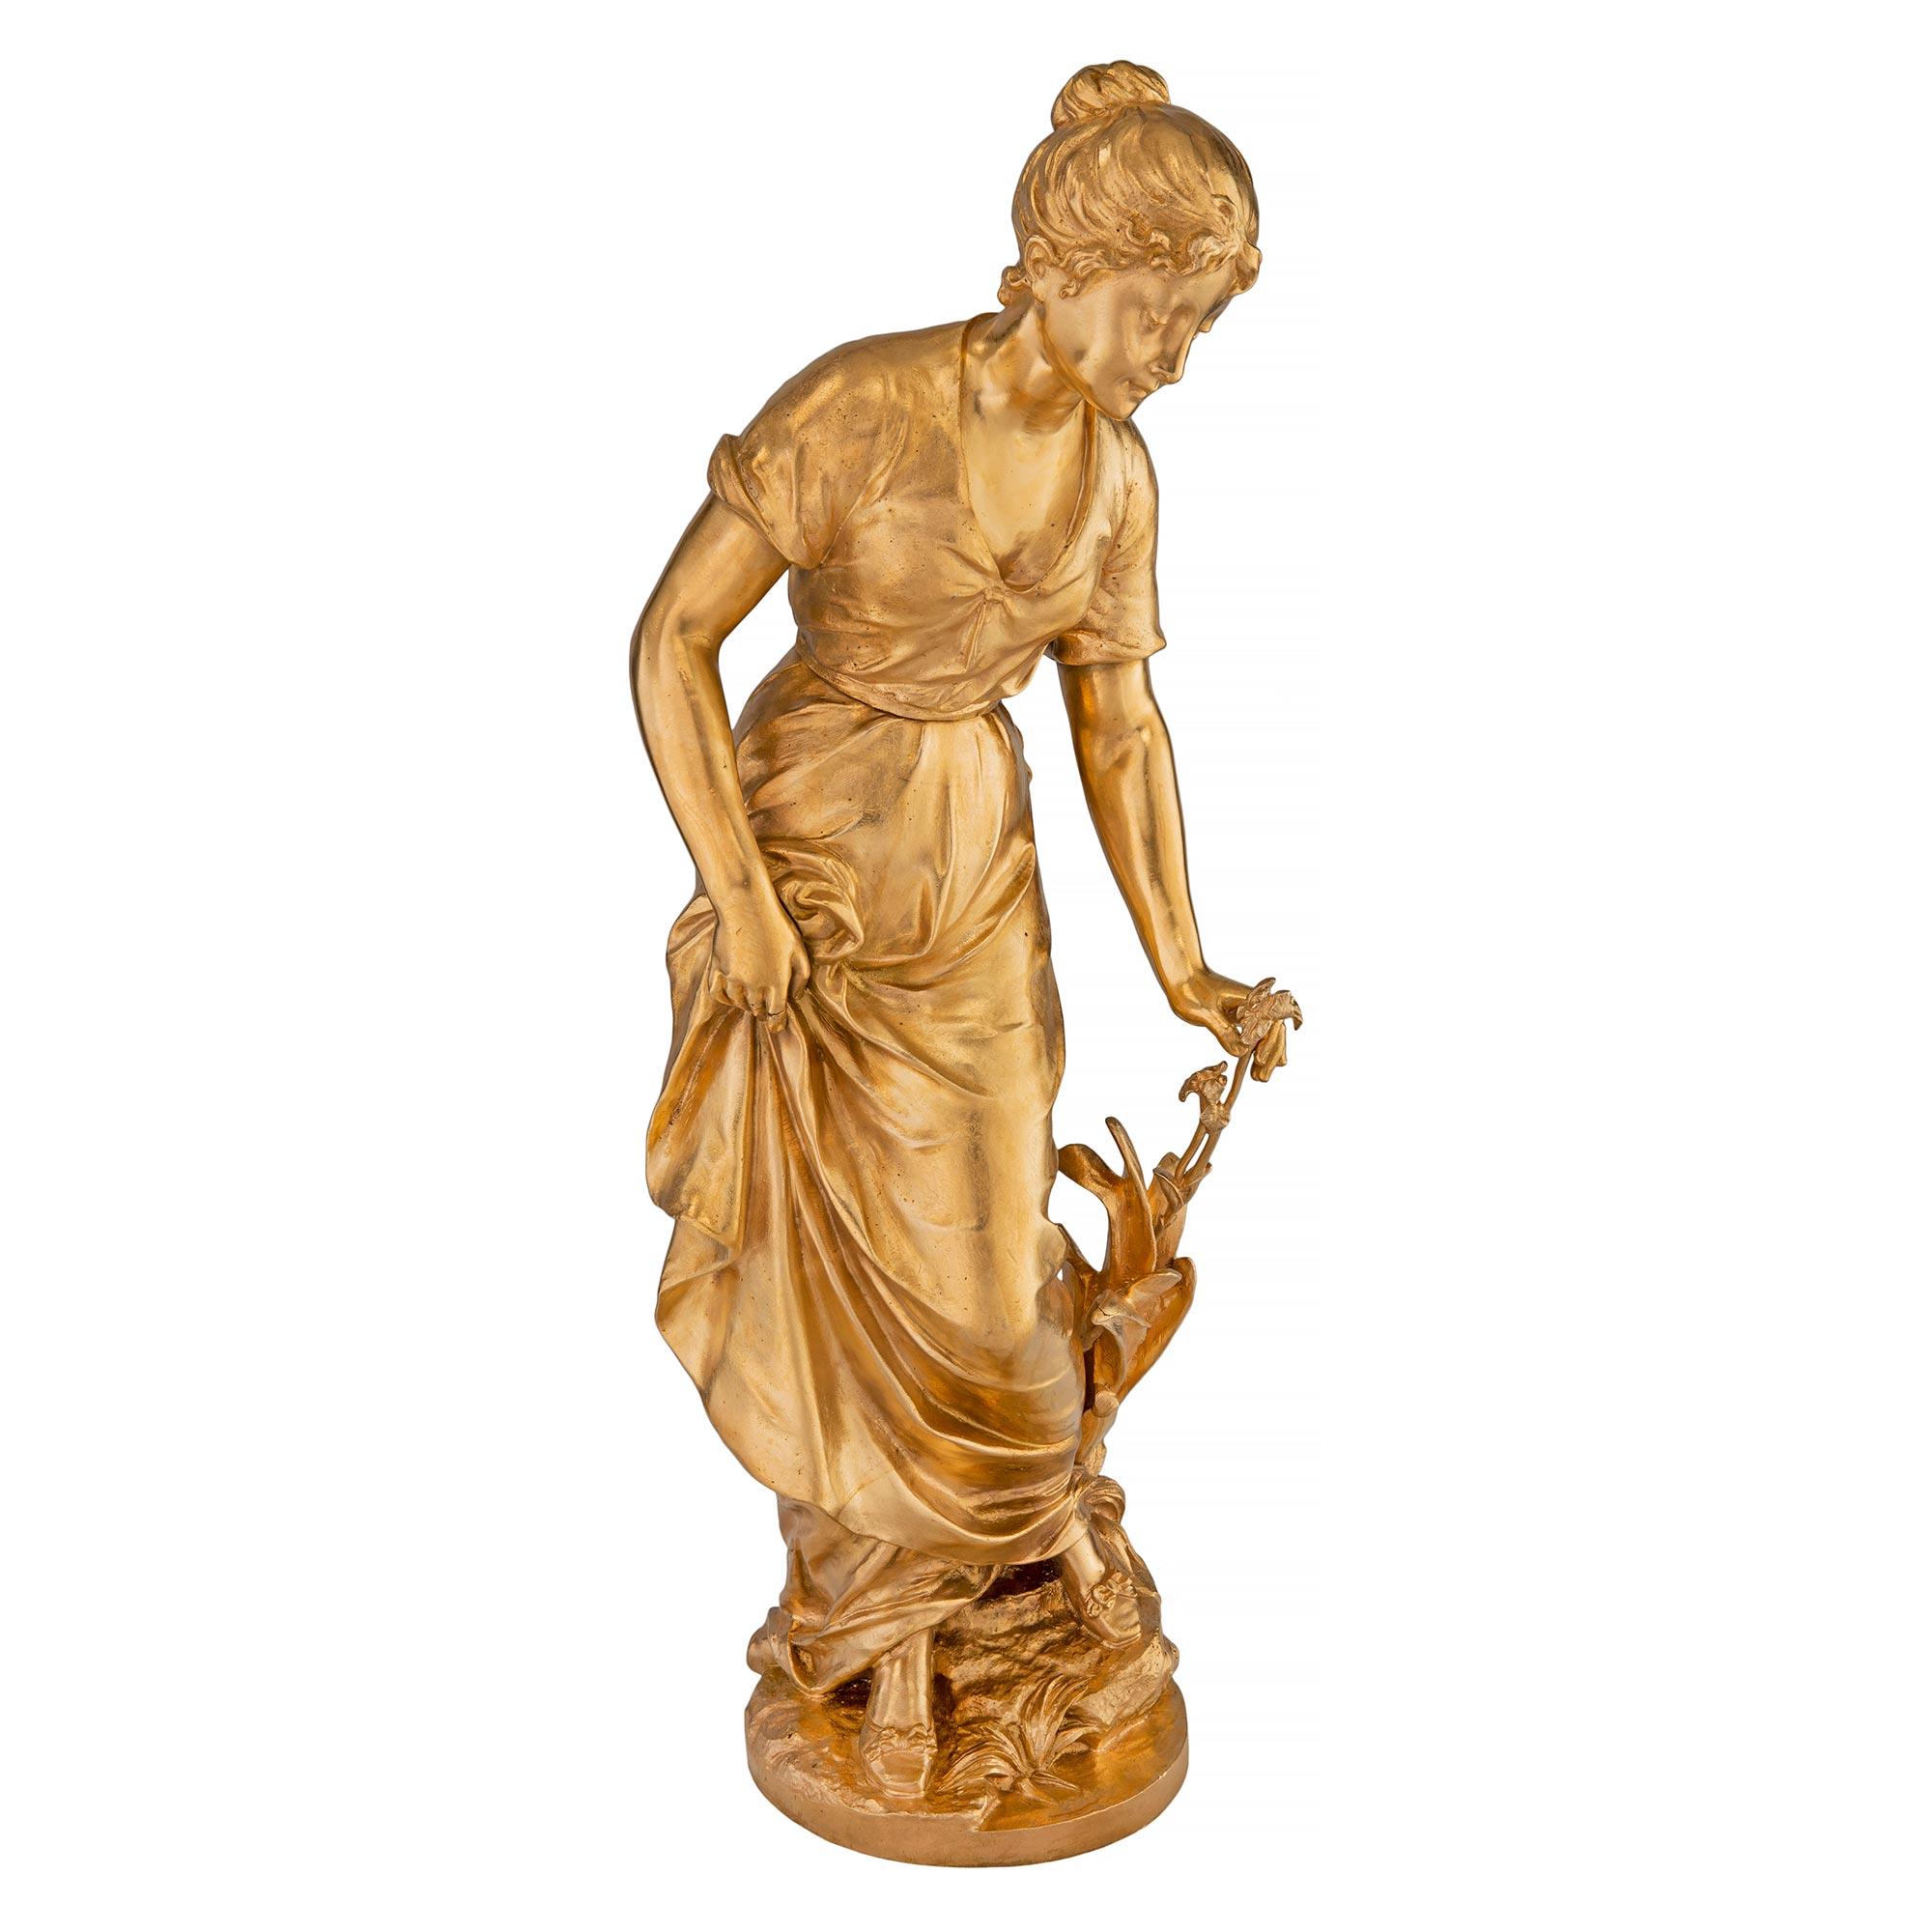 A superb French 19th century Louis XVI st. ormolu statue of a beautiful maiden, signed S. Kinsburger. The statue is raised by a wonderfully executed terrain designed base, where the lovely lady is standing. She is wearing a charming flowing dress